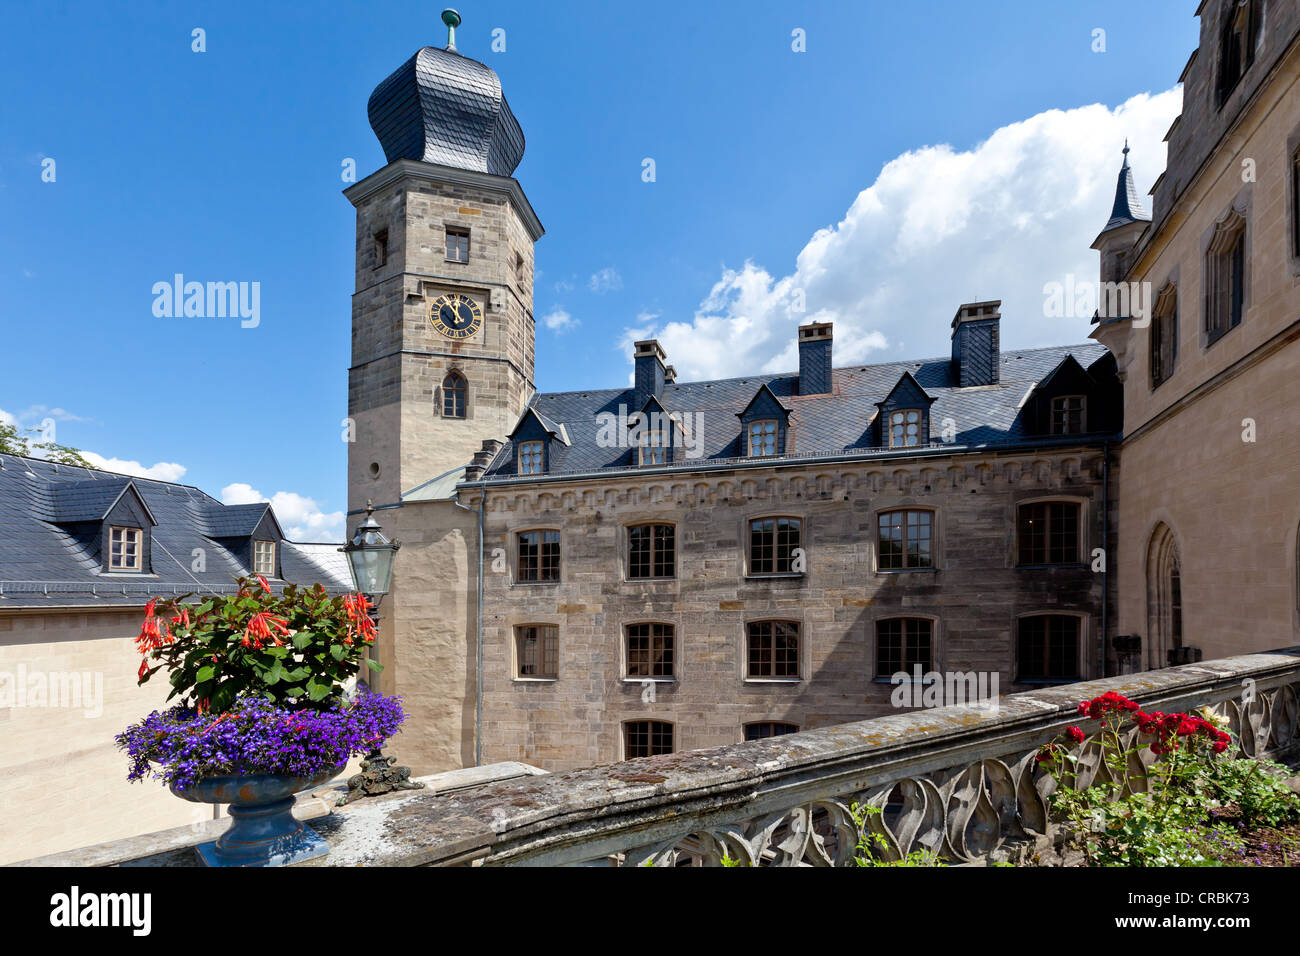 Schloss Callenberg palace, hunting lodge and summer residence of the Dukes of Saxe-Coburg and Gotha, Coburg, Upper Franconia Stock Photo